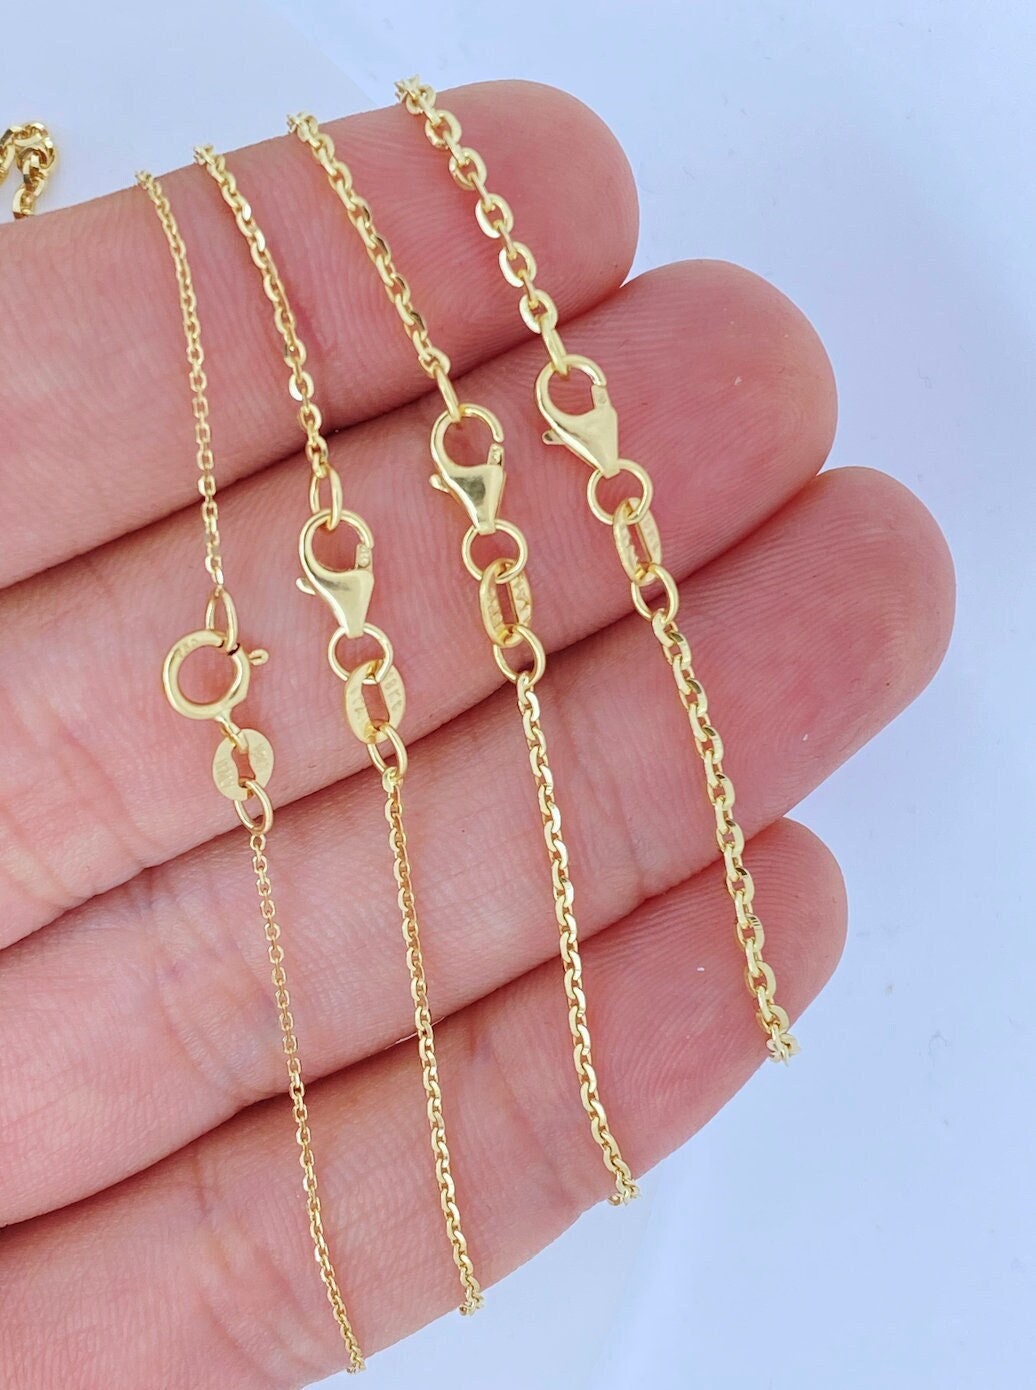 5 METERS 2MM THIN Gold PLATED METAL CHAIN FOR JEWELRY MAKING